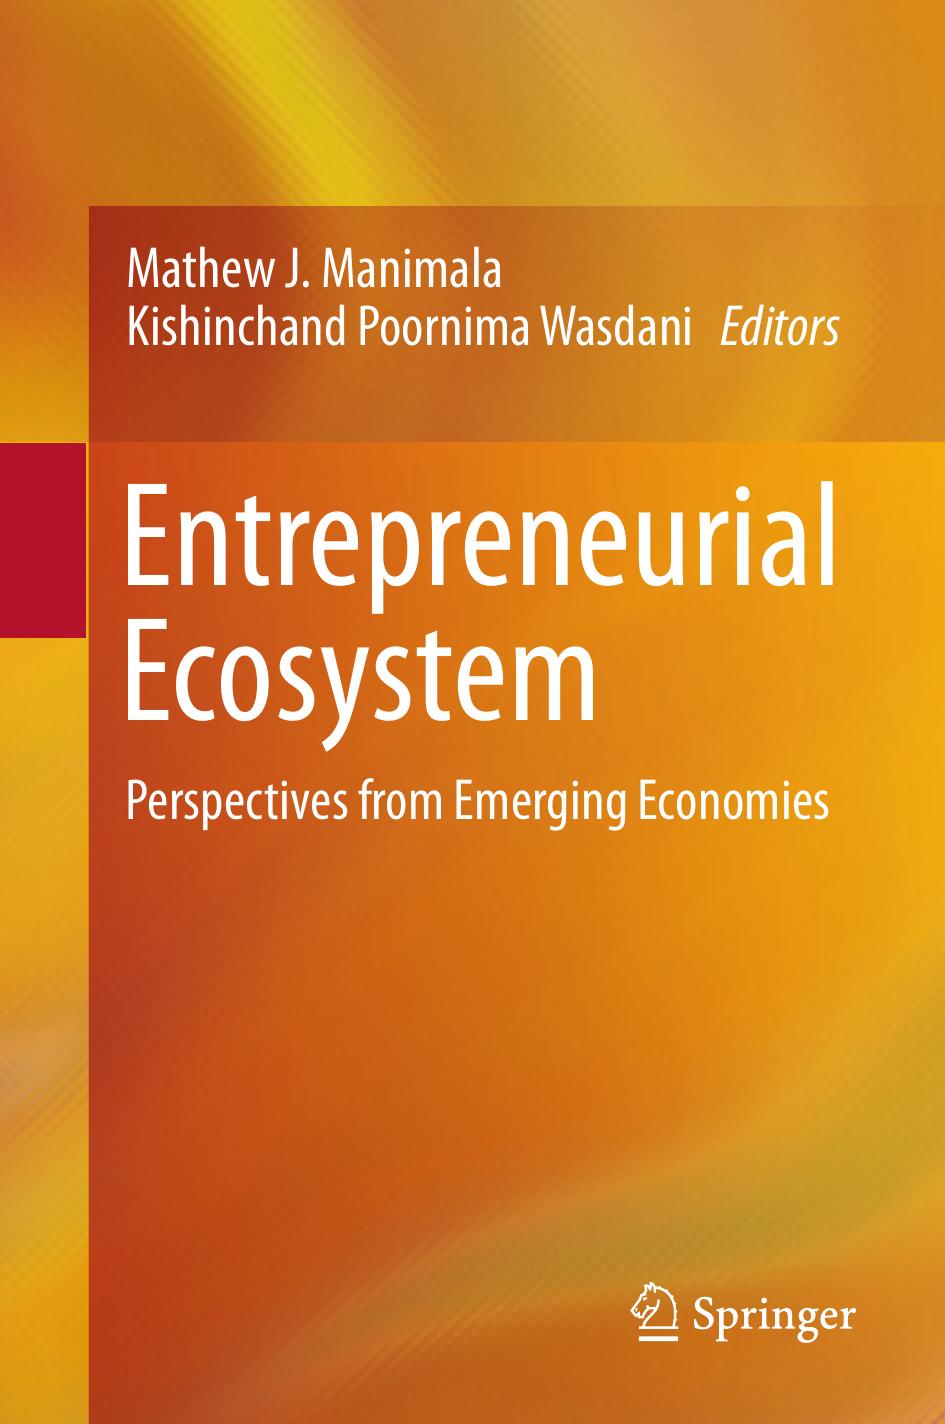 Entrepreneurial Ecosystem  Perspectives from Emerging Economies 2015